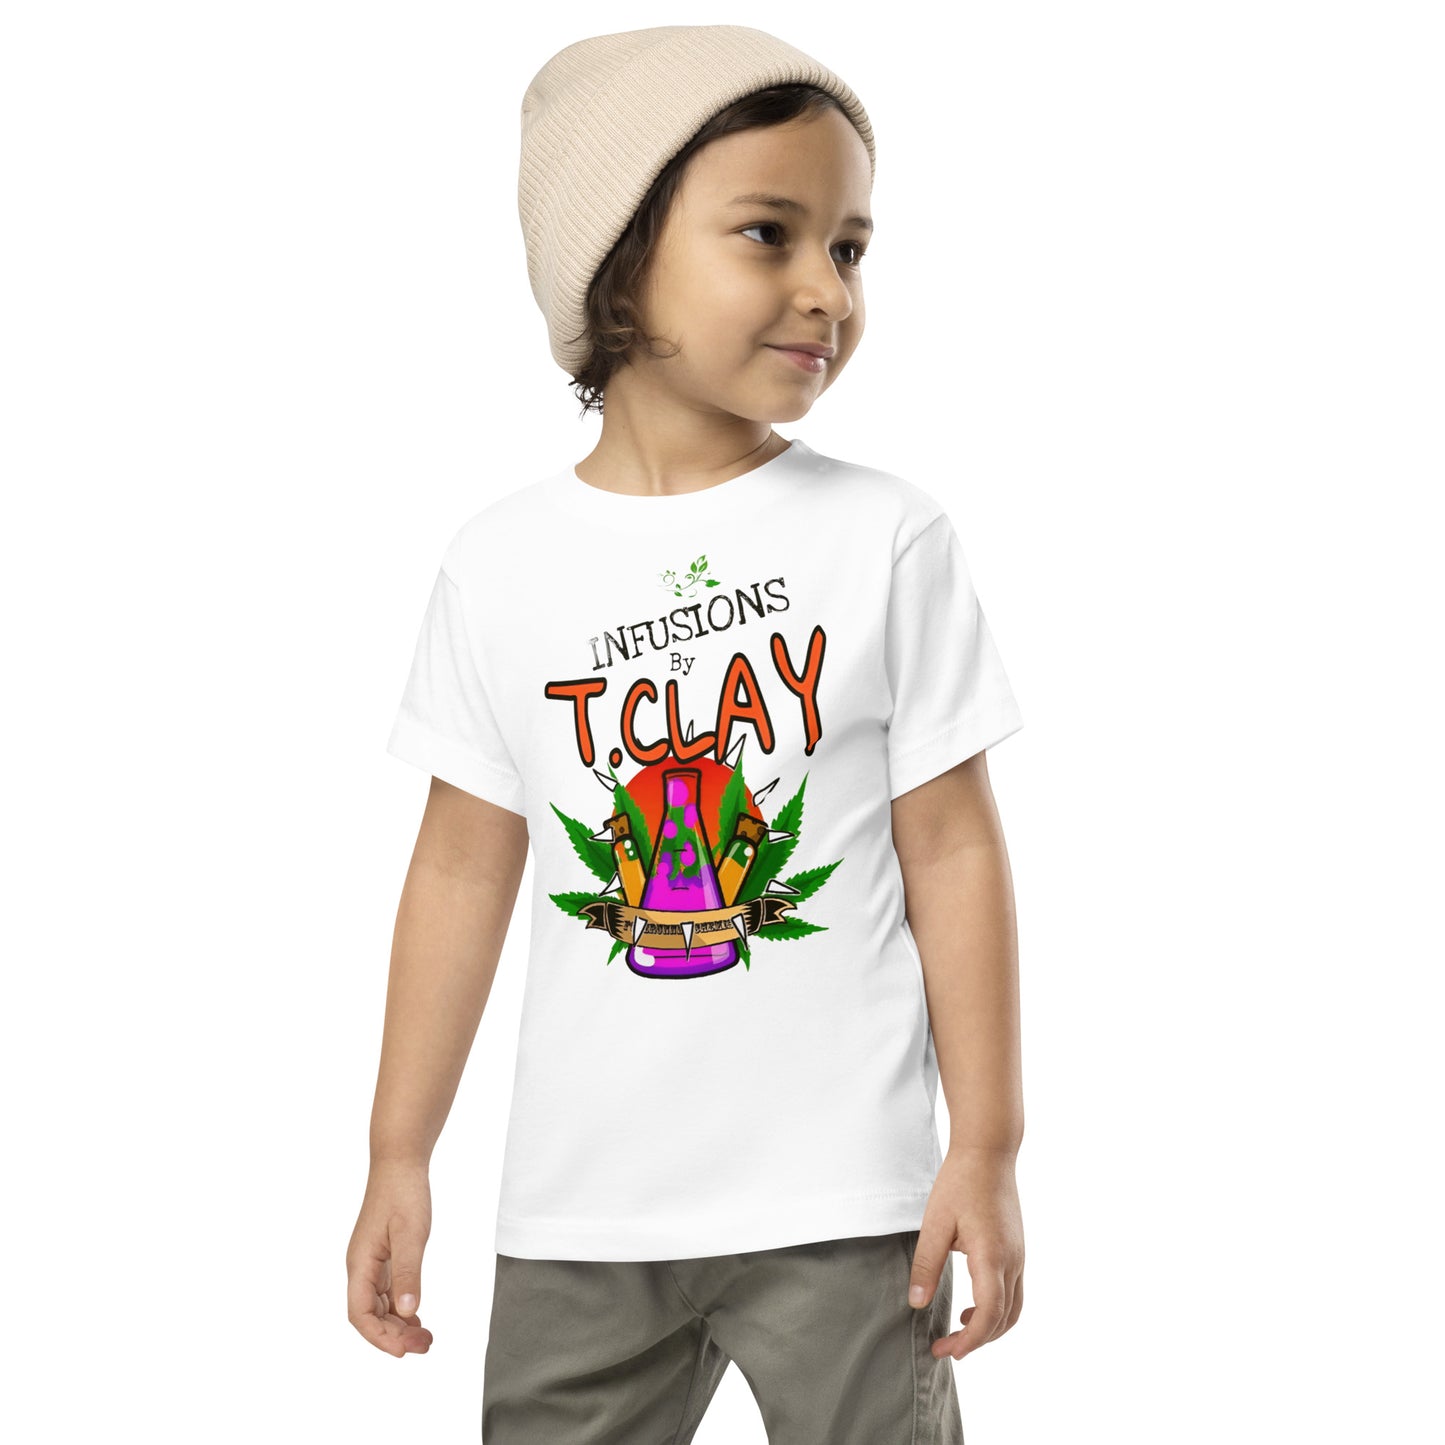 "INFUSIONS by T. Clay logo" Toddler Tee